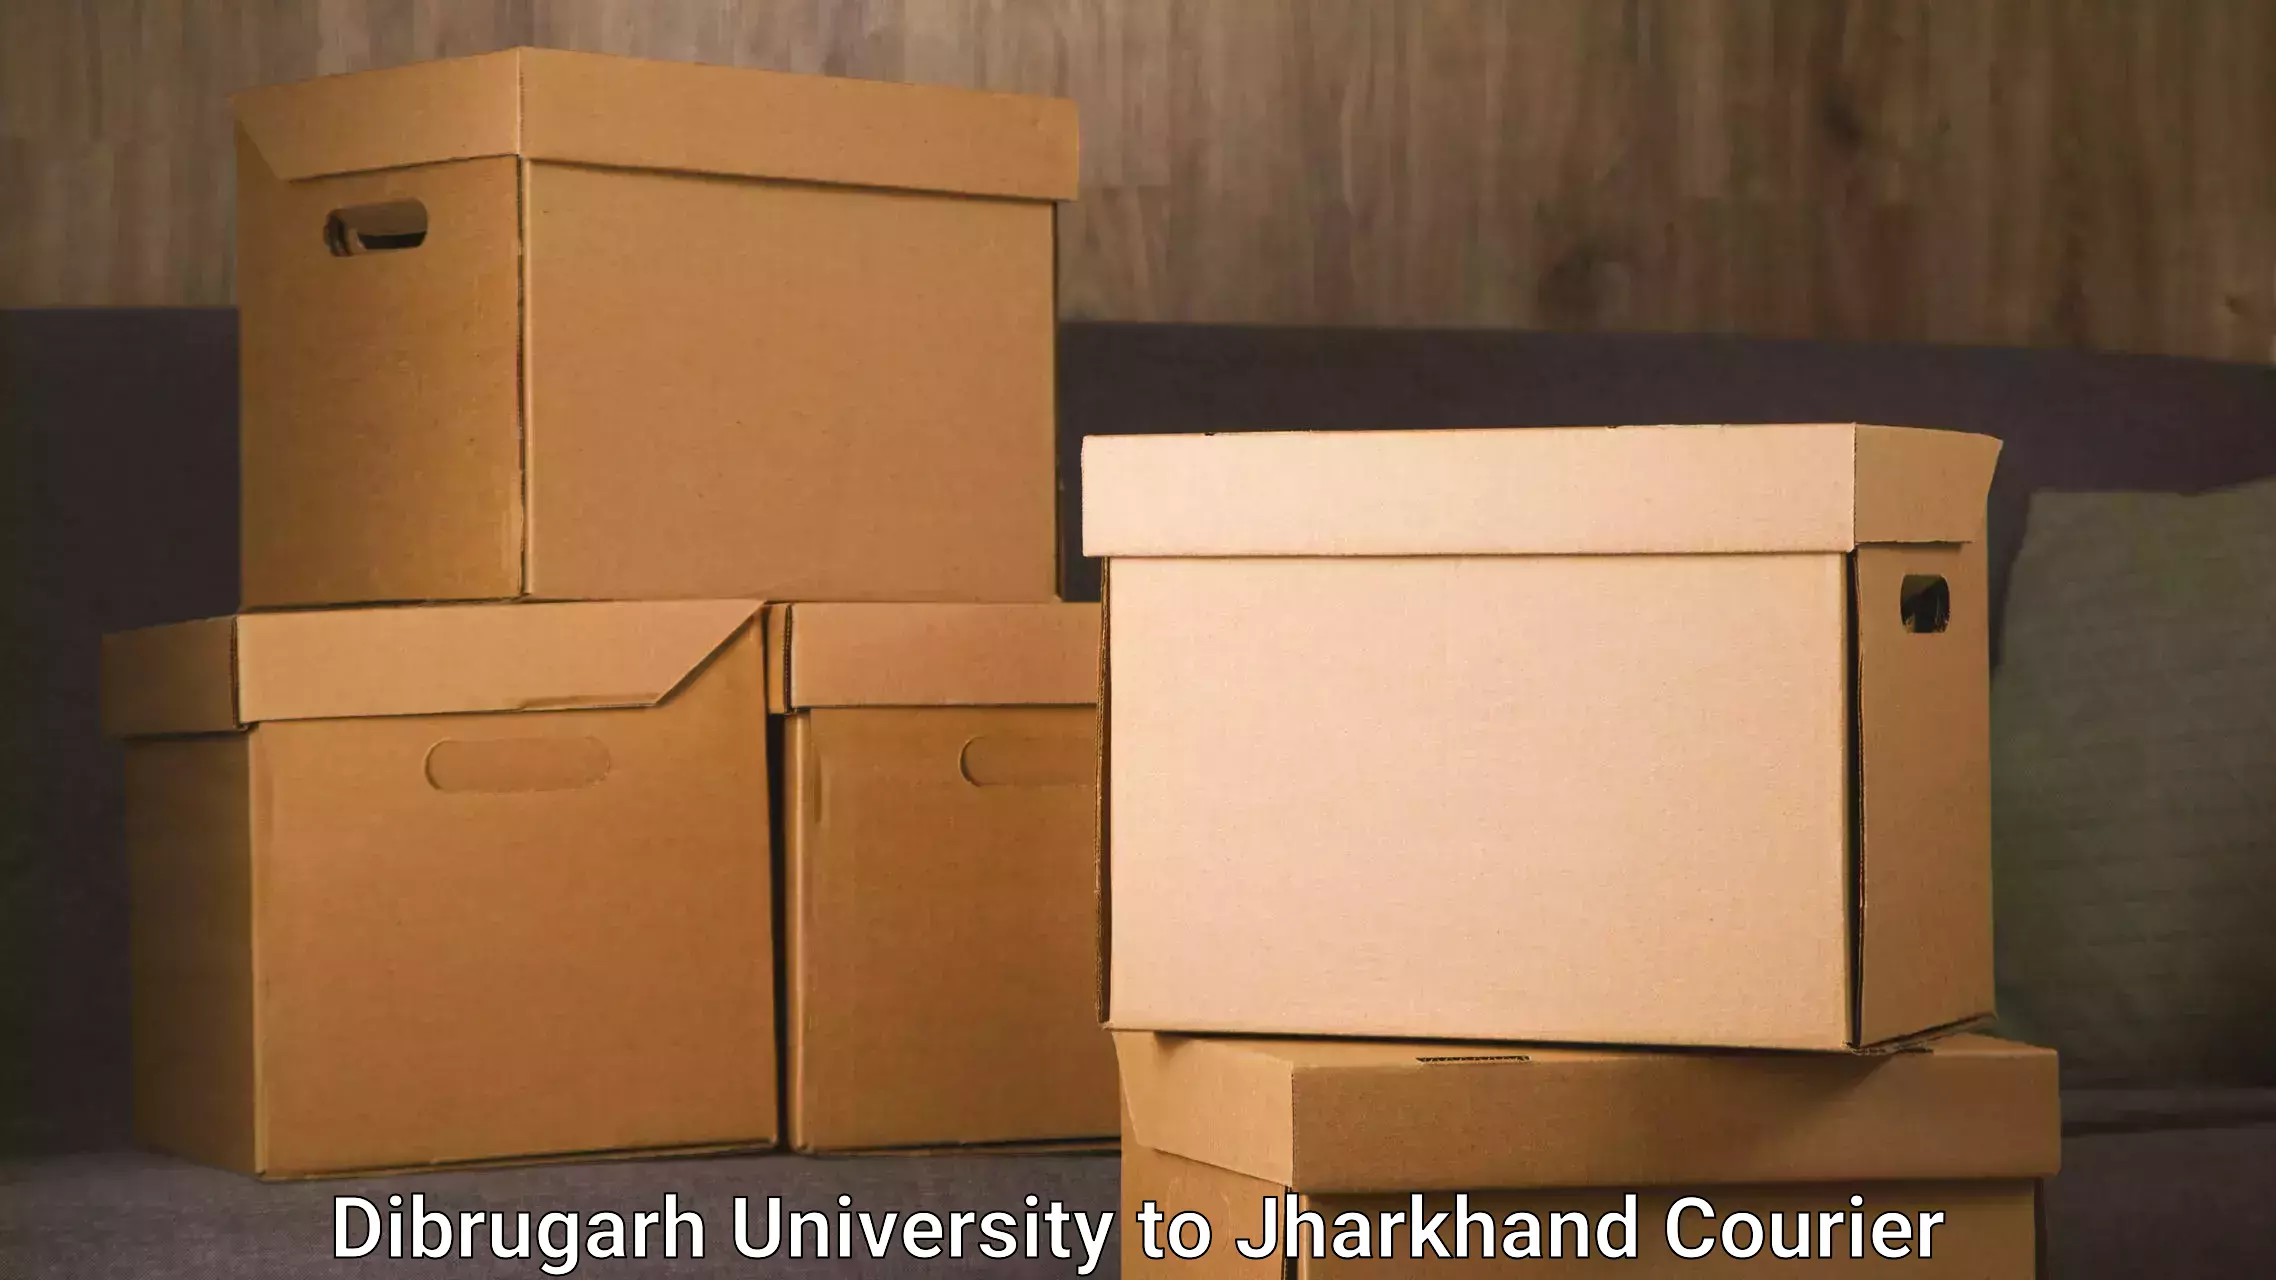 Reliable parcel services Dibrugarh University to IIT Dhanbad